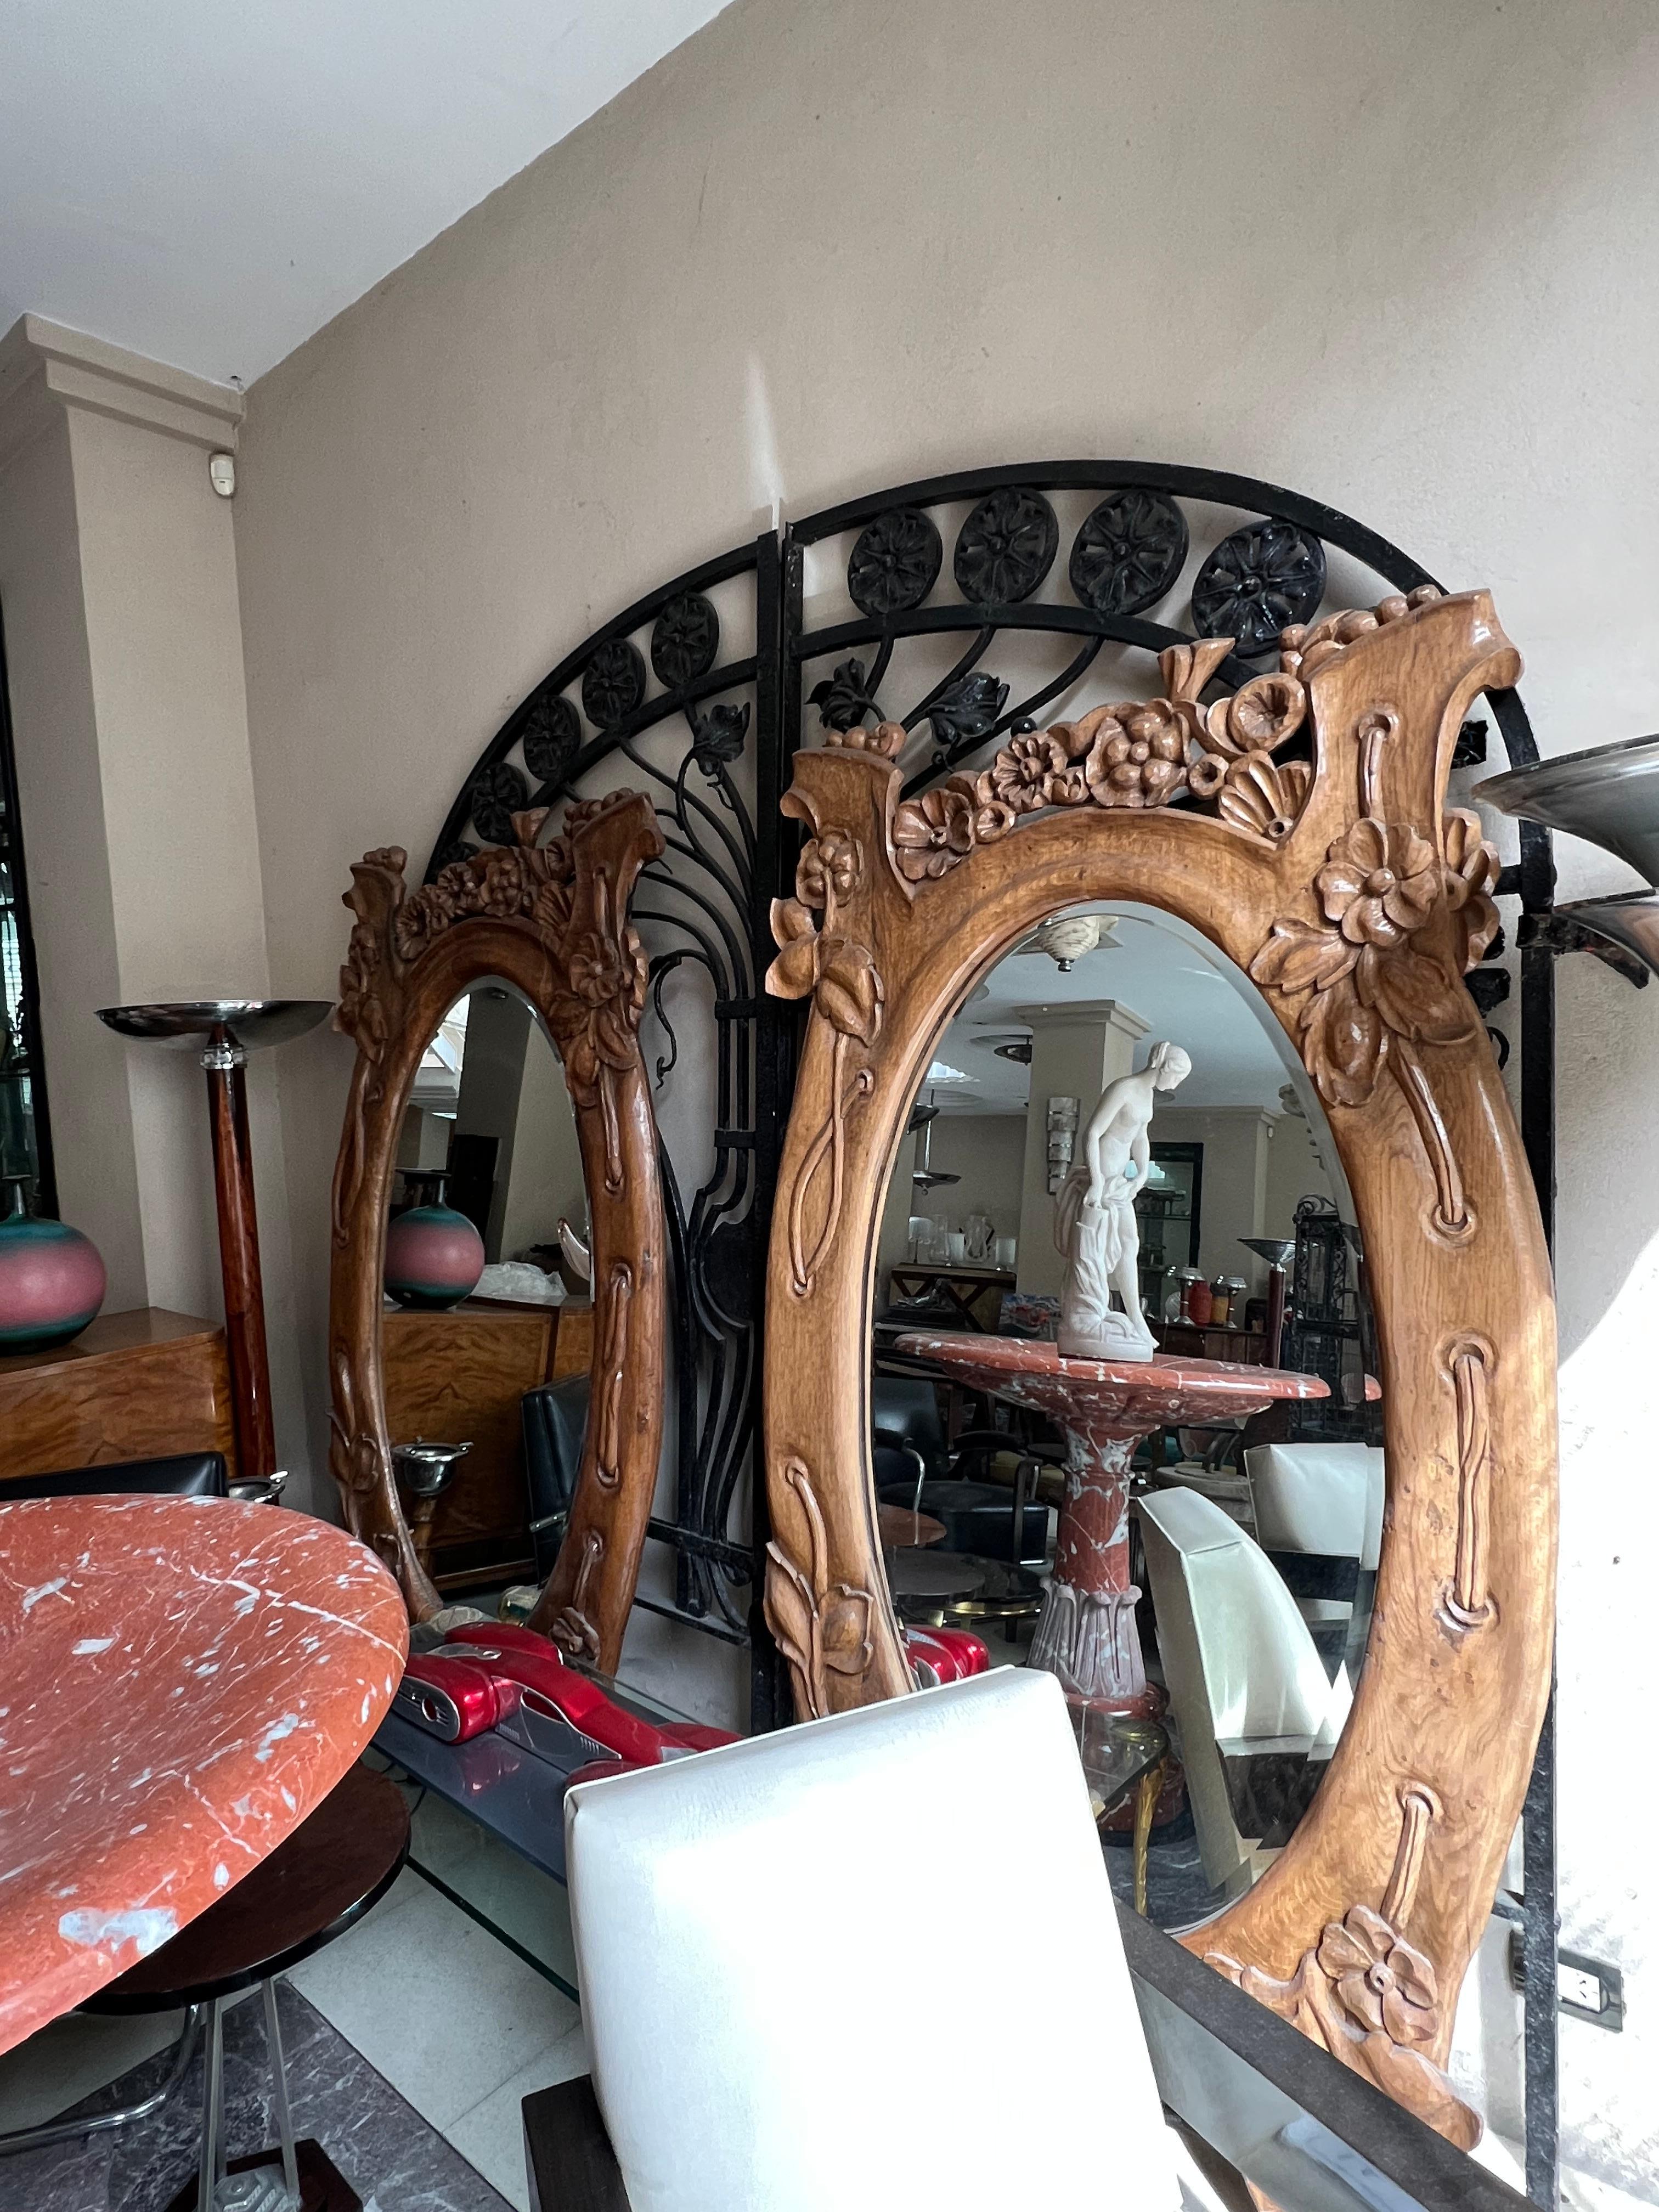 Jugendstil, Art Nouveau, Liberty

Material: wood and mirror
Style: Art Nouveau
Country: France
The depth of the carving of the flowers is a little deeper in one than in the other
We have specialized in the sale of Art Deco and Art Nouveau and